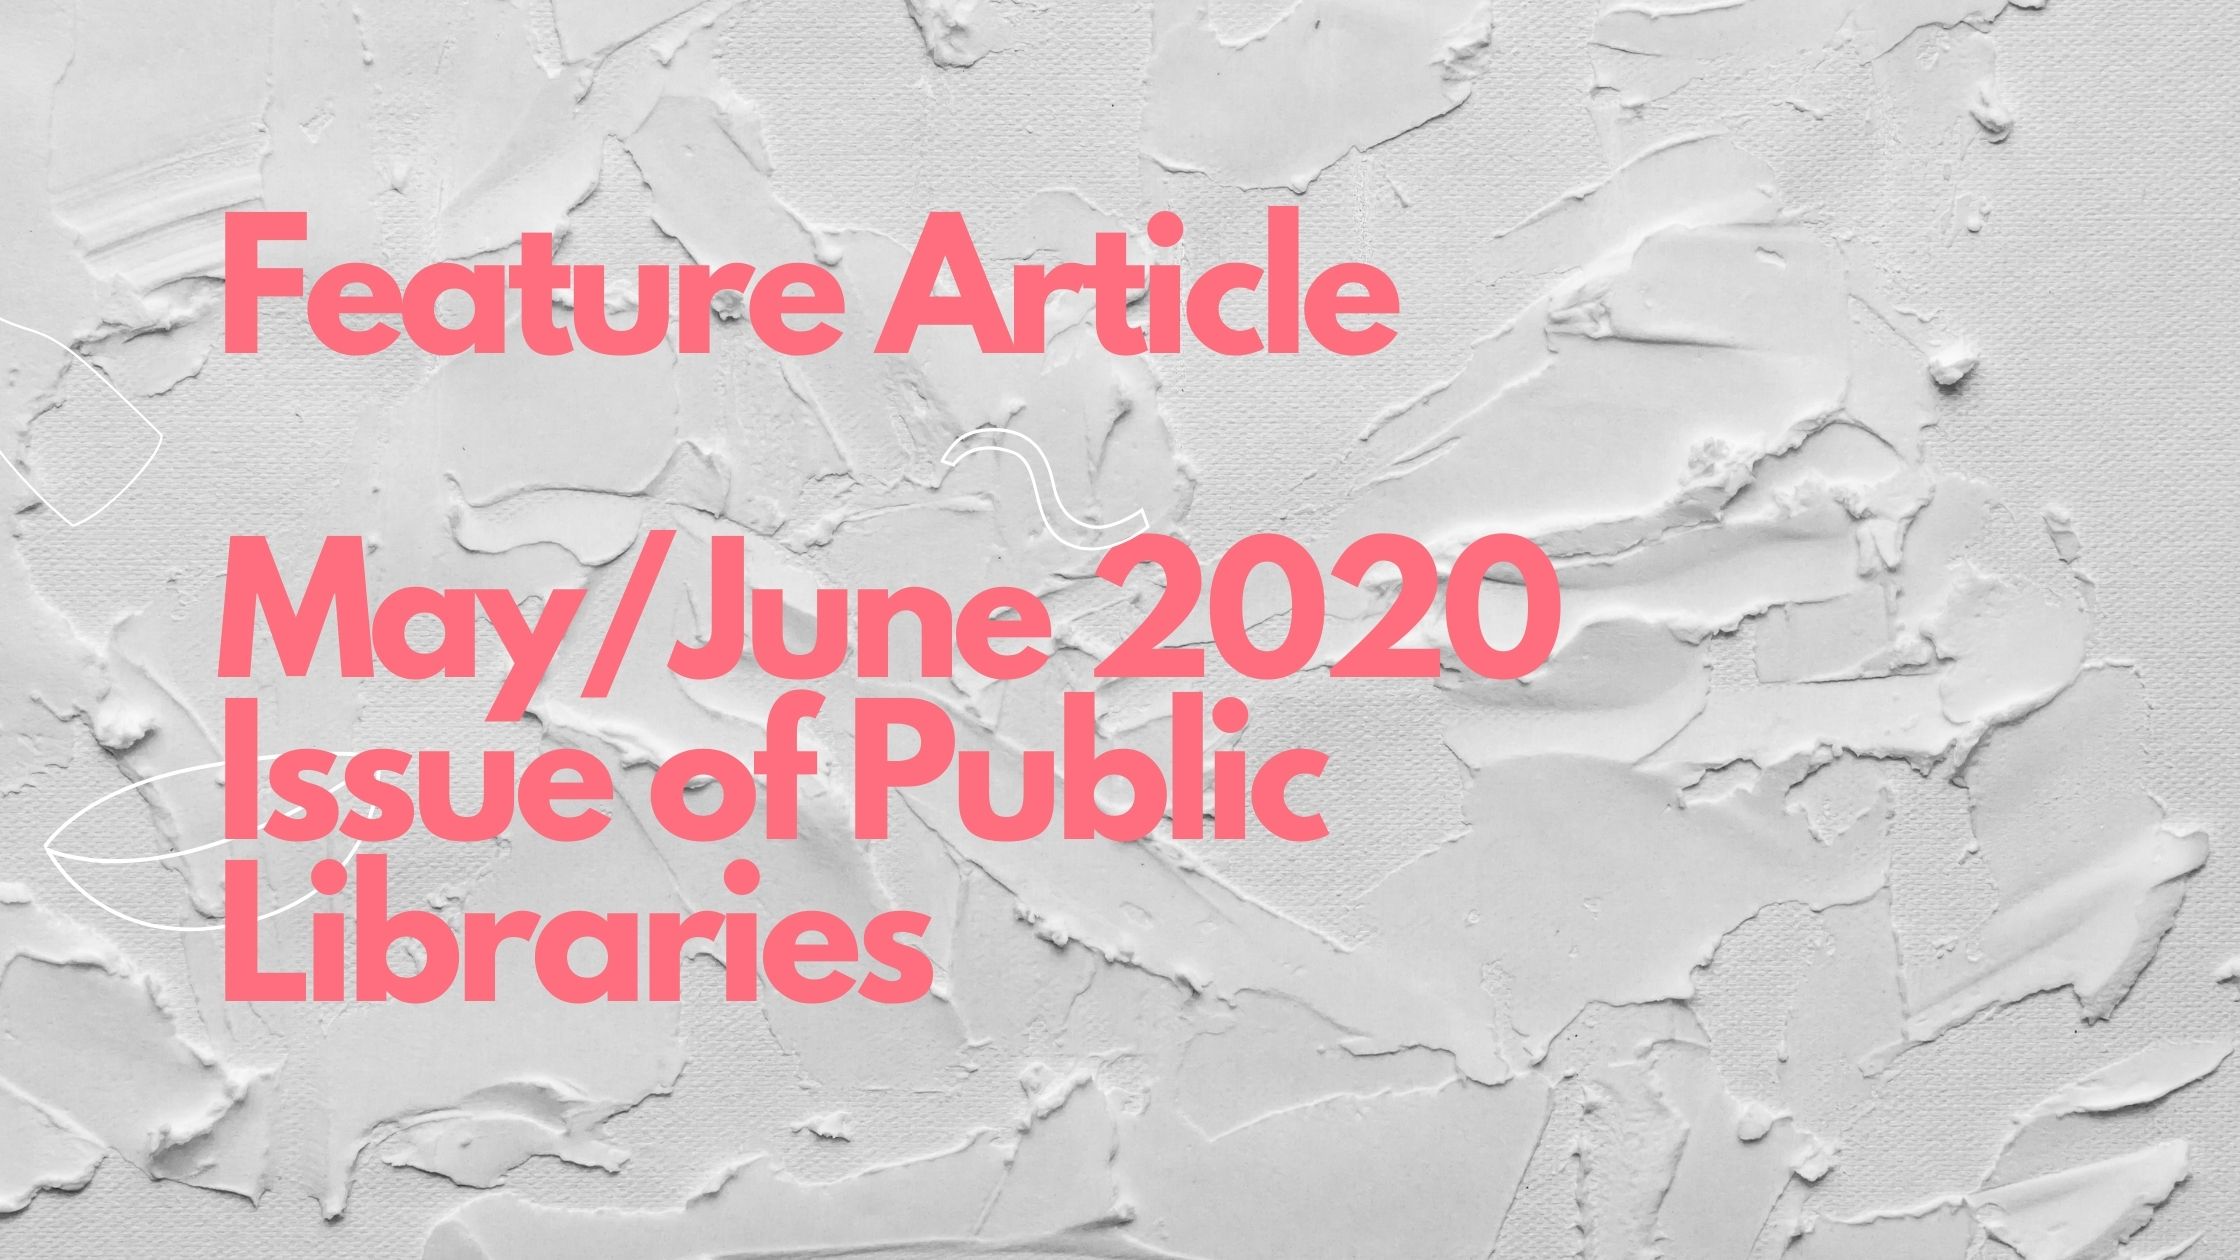 Feature Article May/June 2020 Issue of Public Libraries